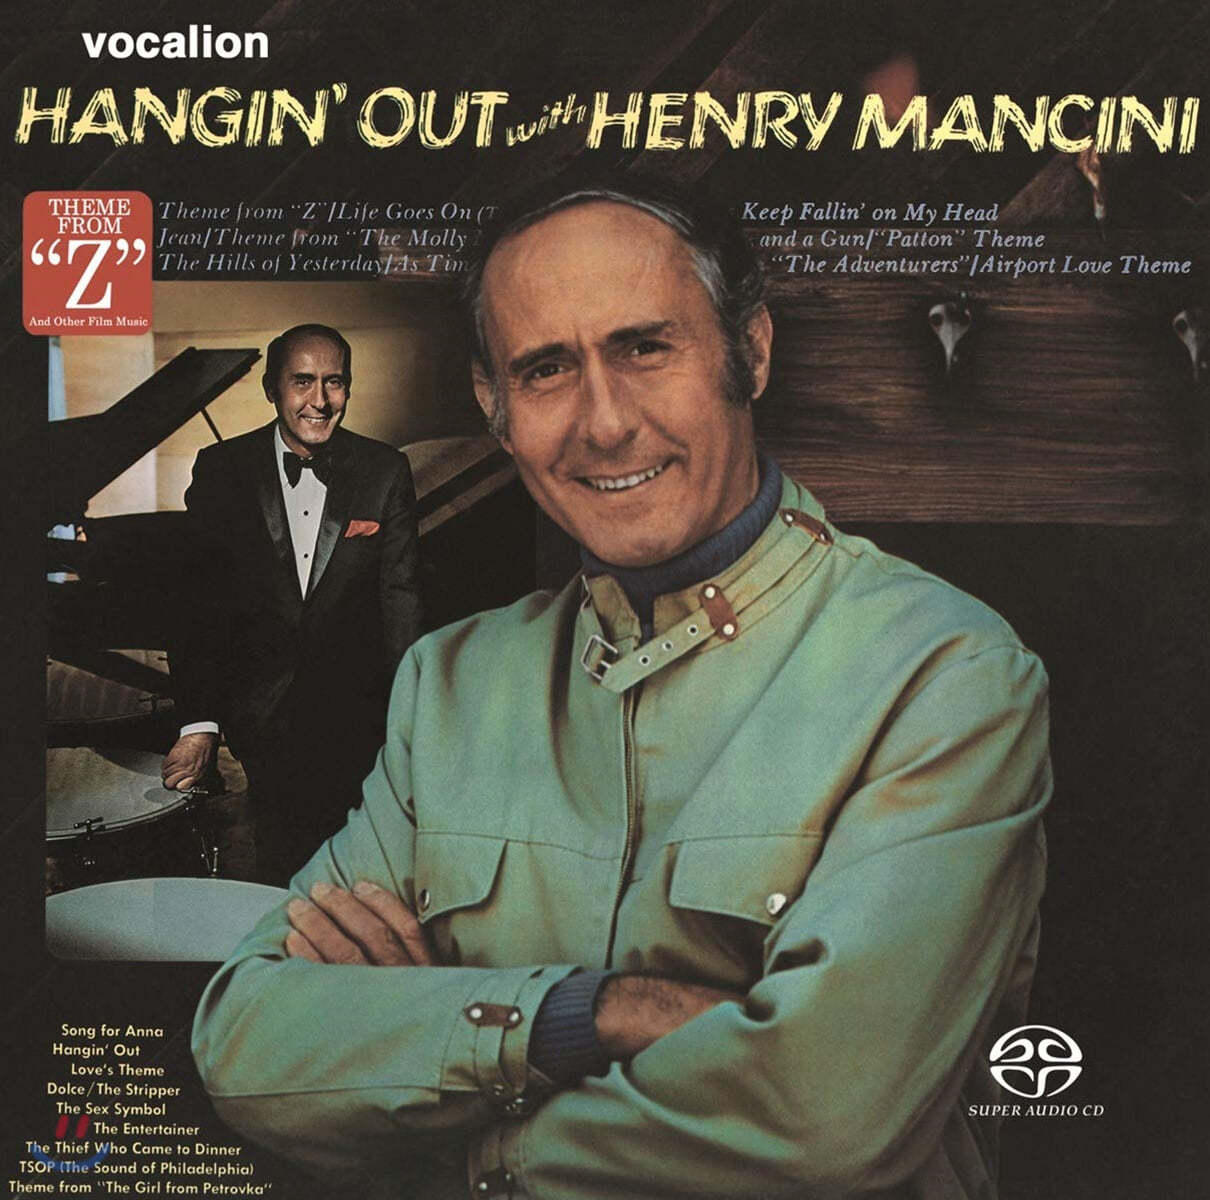 Henry Mancini (헨리 맨시니) - Hangin' Out with Henry Mancini & Theme from ""Z"" and Other Film Music (Original Analog Remastered)